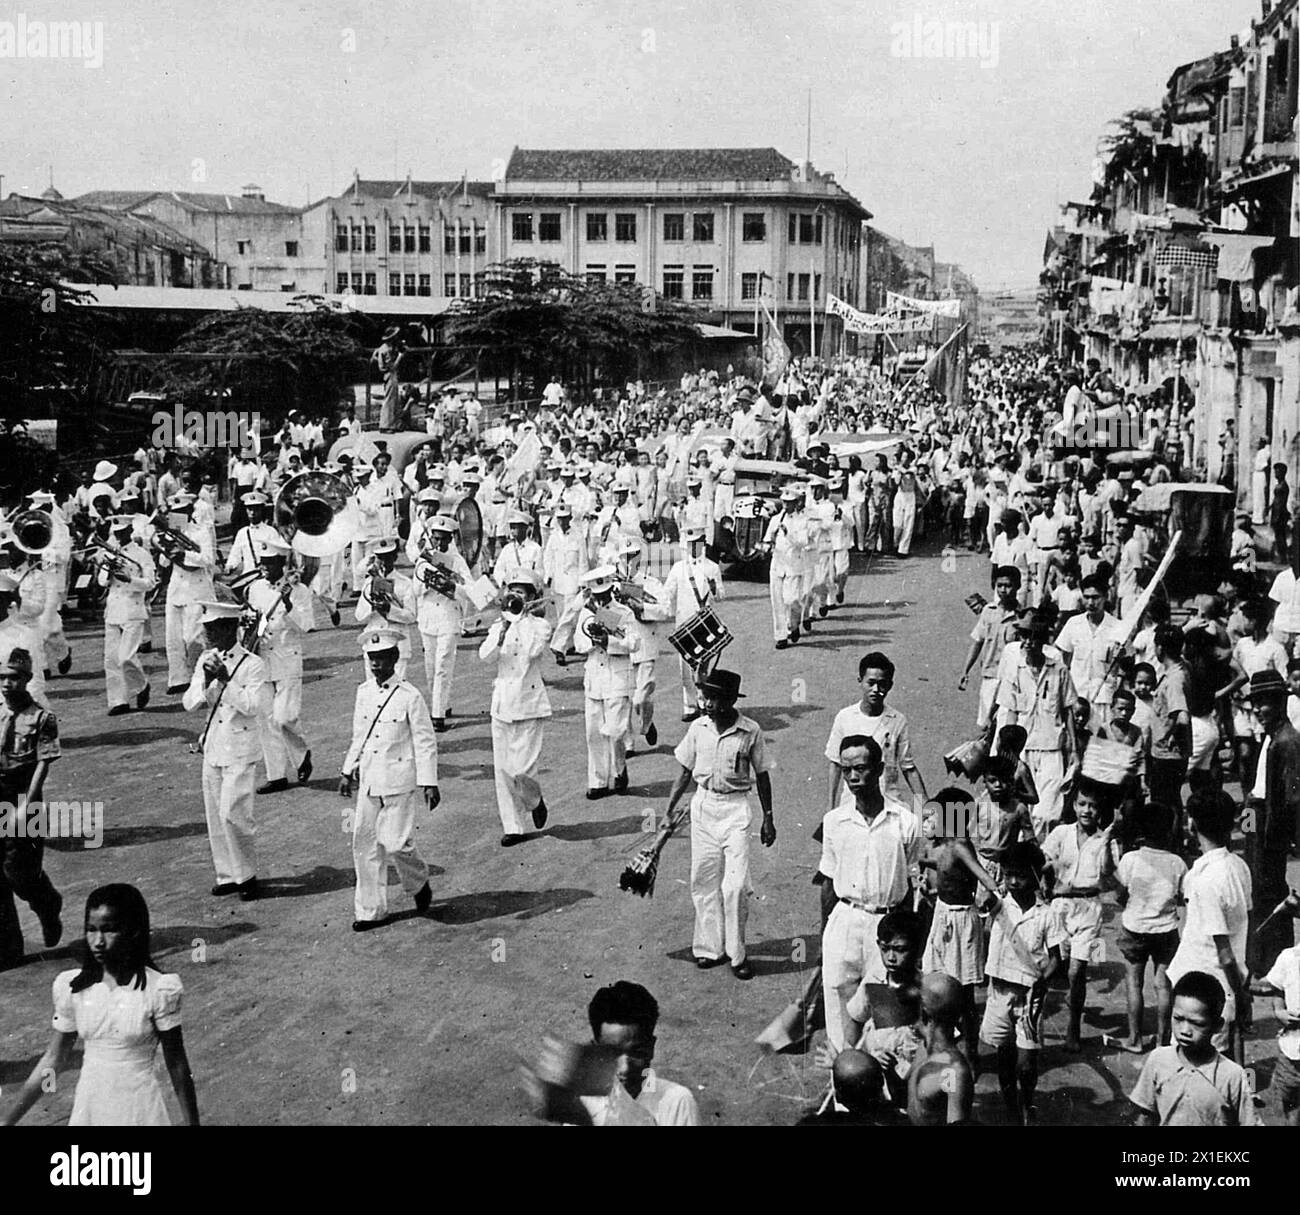 Original Caption: 'Brass band leads procession of people of Singapore in Victory Celebration, to demonstrate their rejoicing at the landing of Empire Forces to occupy Singapore after 3.5 years of Japanese rule, the people held a celebration. The band is the Royal marines.' ca. September 1945 Stock Photo